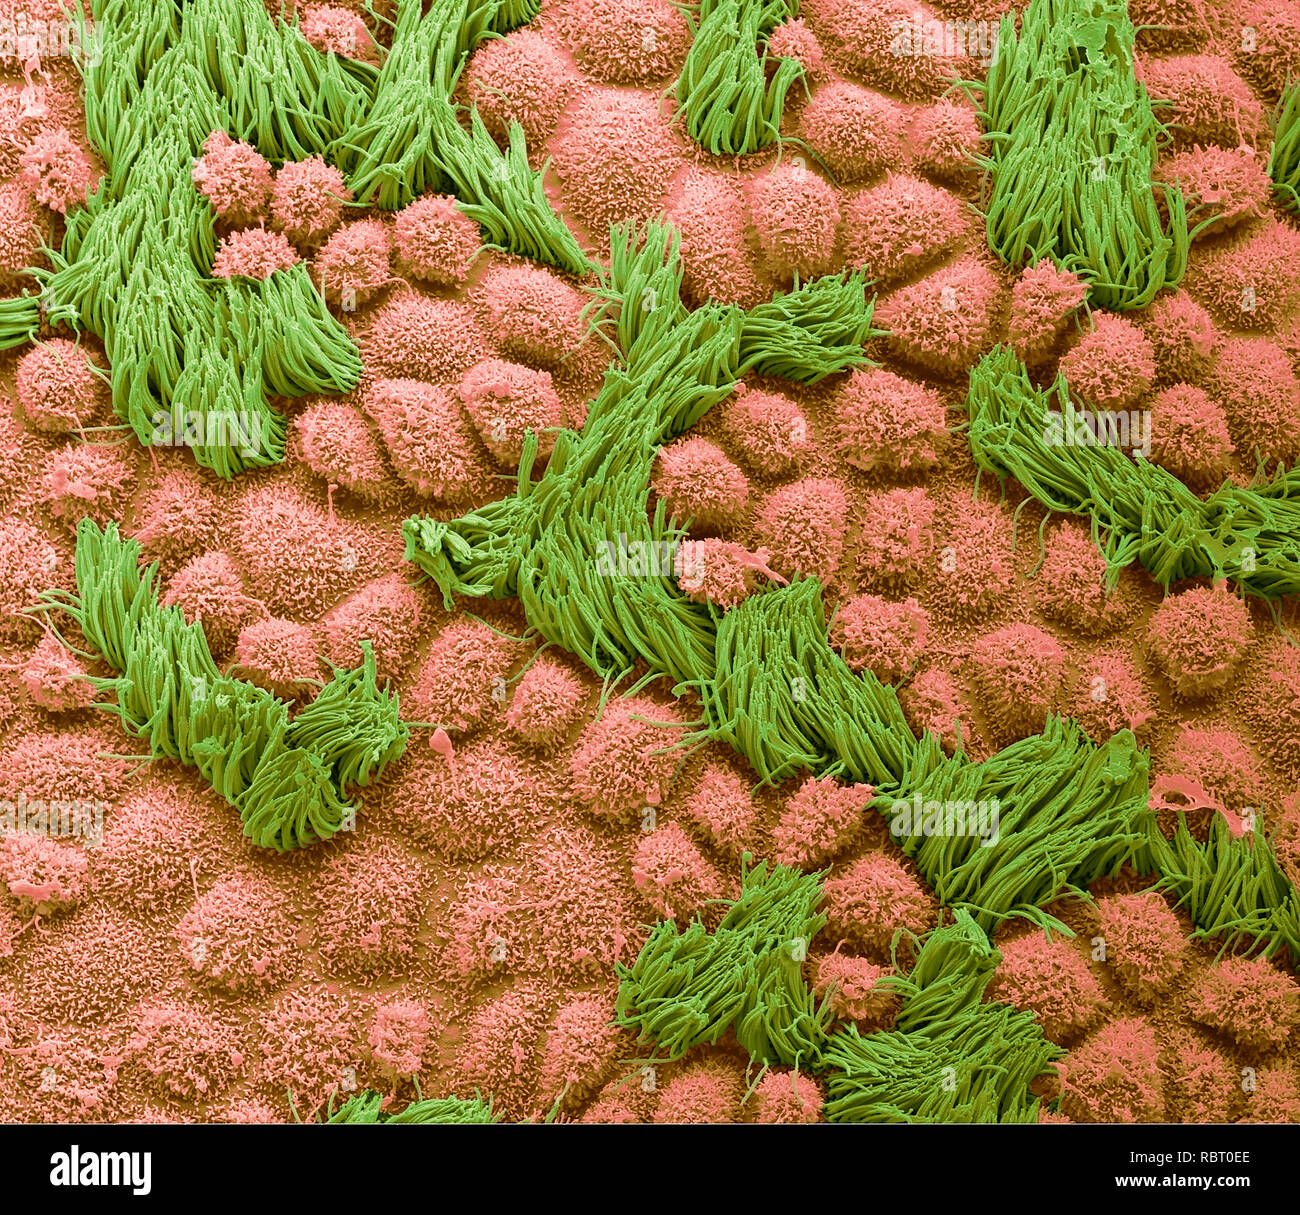 Fallopian tube. Coloured scanning electron micrograph (SEM) of the surface of a human fallopian tube. Fallopian tubes are ducts that lead from the ovaries to the uterus. The epithelium consists of columnar cells, many of which have cilia (green). The cilia beat is towards the uterus, aiding transport of the egg from the ovary. Coloured blue are the secretory cells with their microvilli projections. These cells secrete a substance that maintains a moist environment in the tube and may provide nutrients for the egg. Magnification: x2000 when printed at 10 centimetres wide. Stock Photo